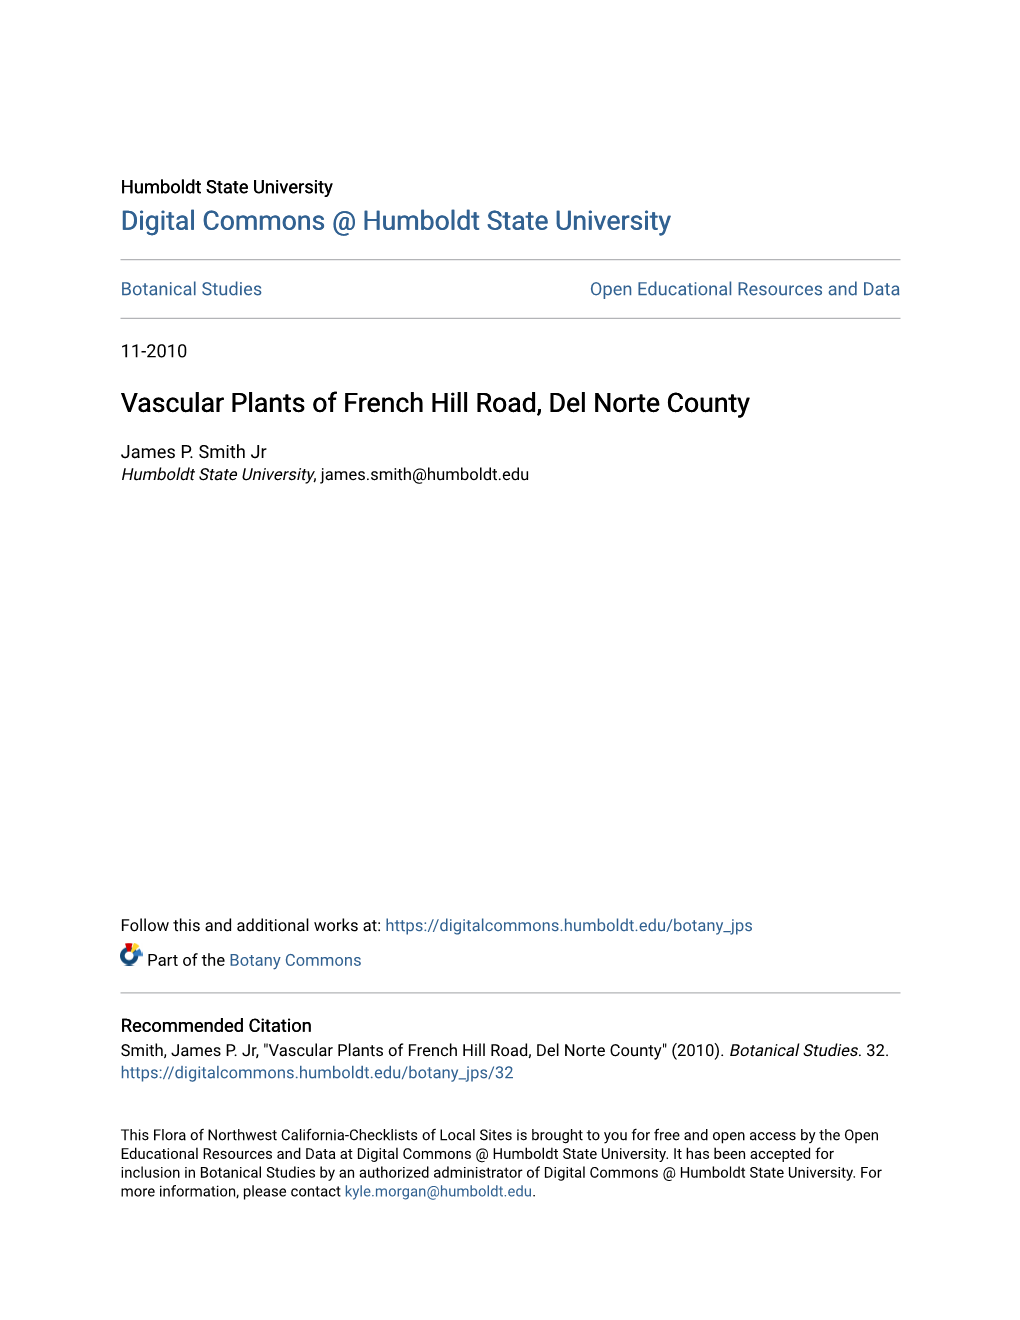 Vascular Plants of French Hill Road, Del Norte County